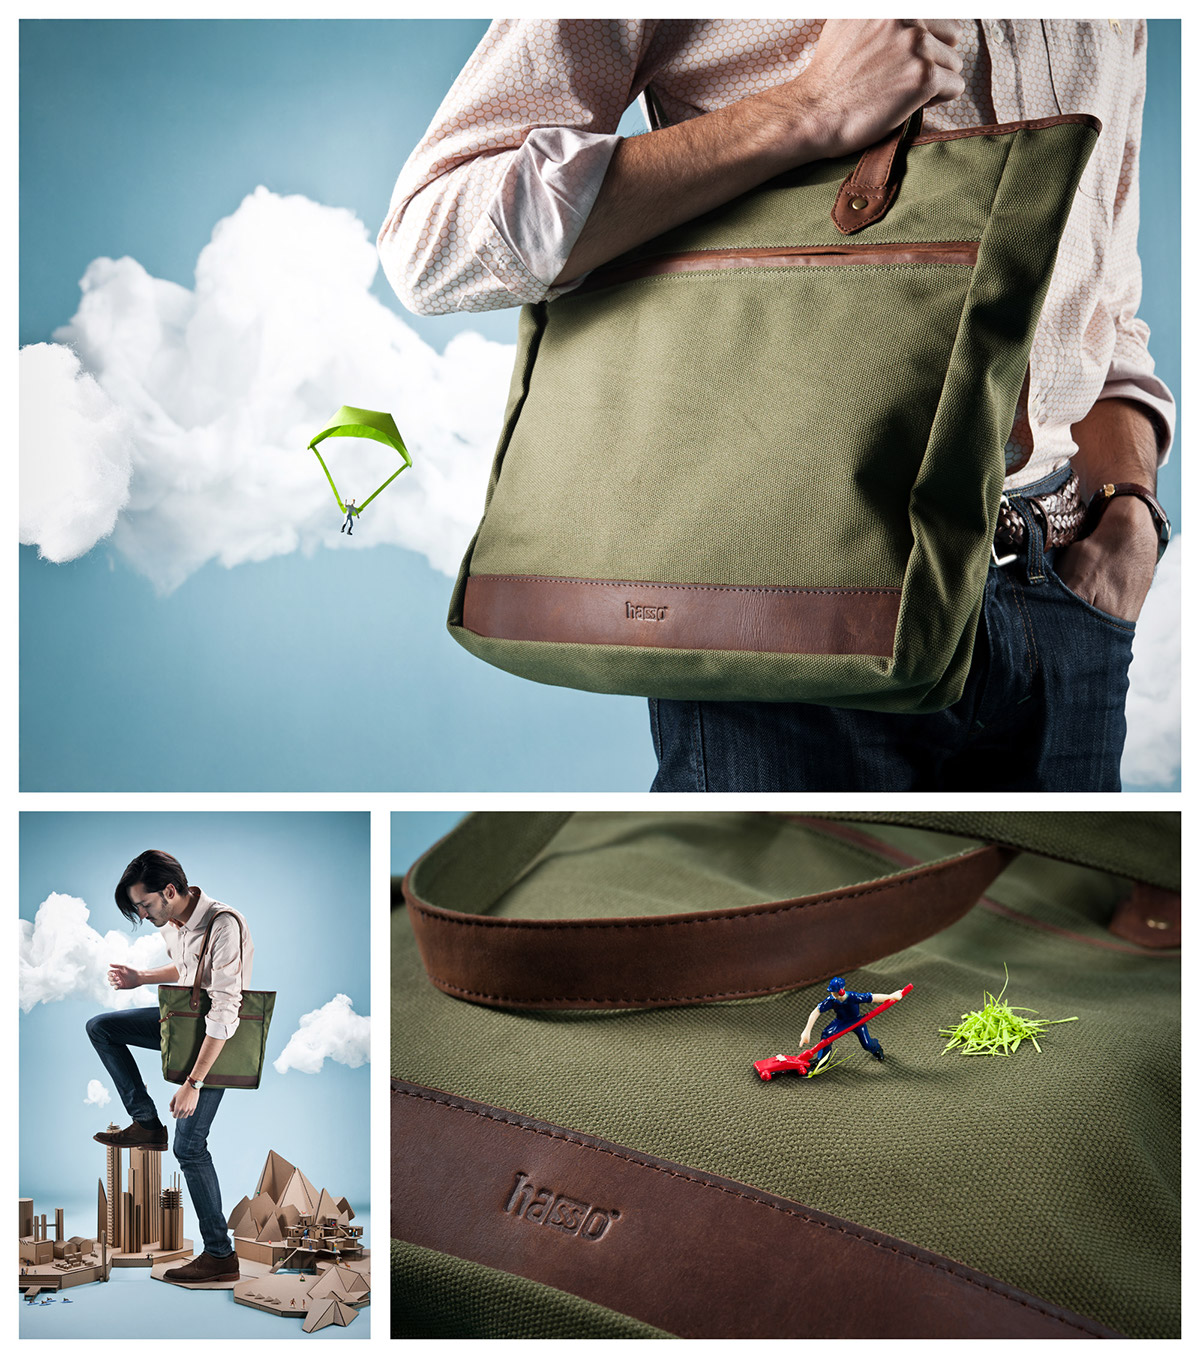 little people Commercial Photography fashion ed leather bag handmade handcraft set construction cardboard